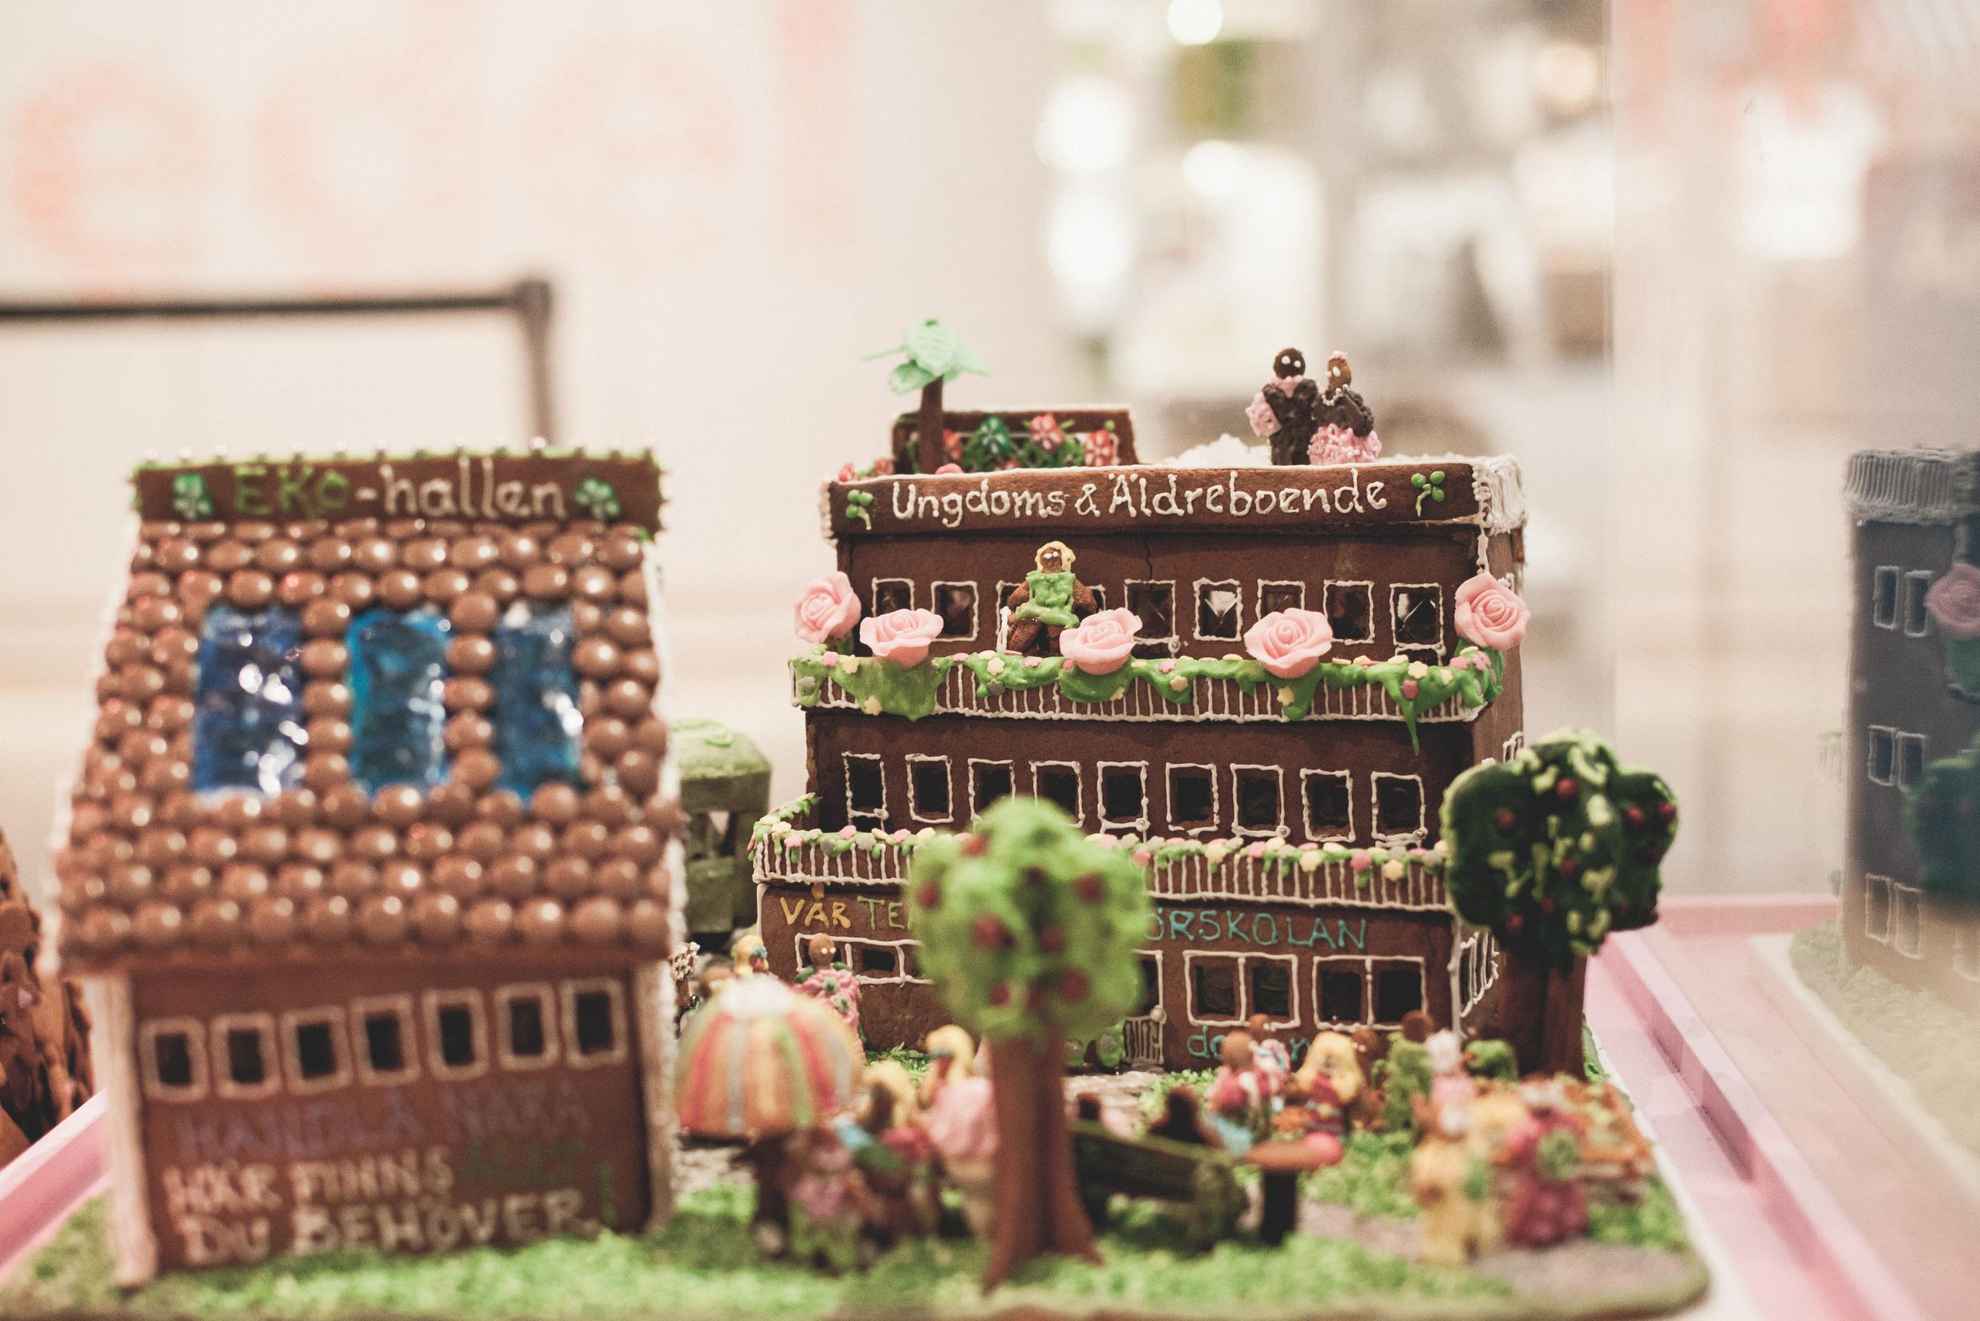 Gingerbread House Exhibition